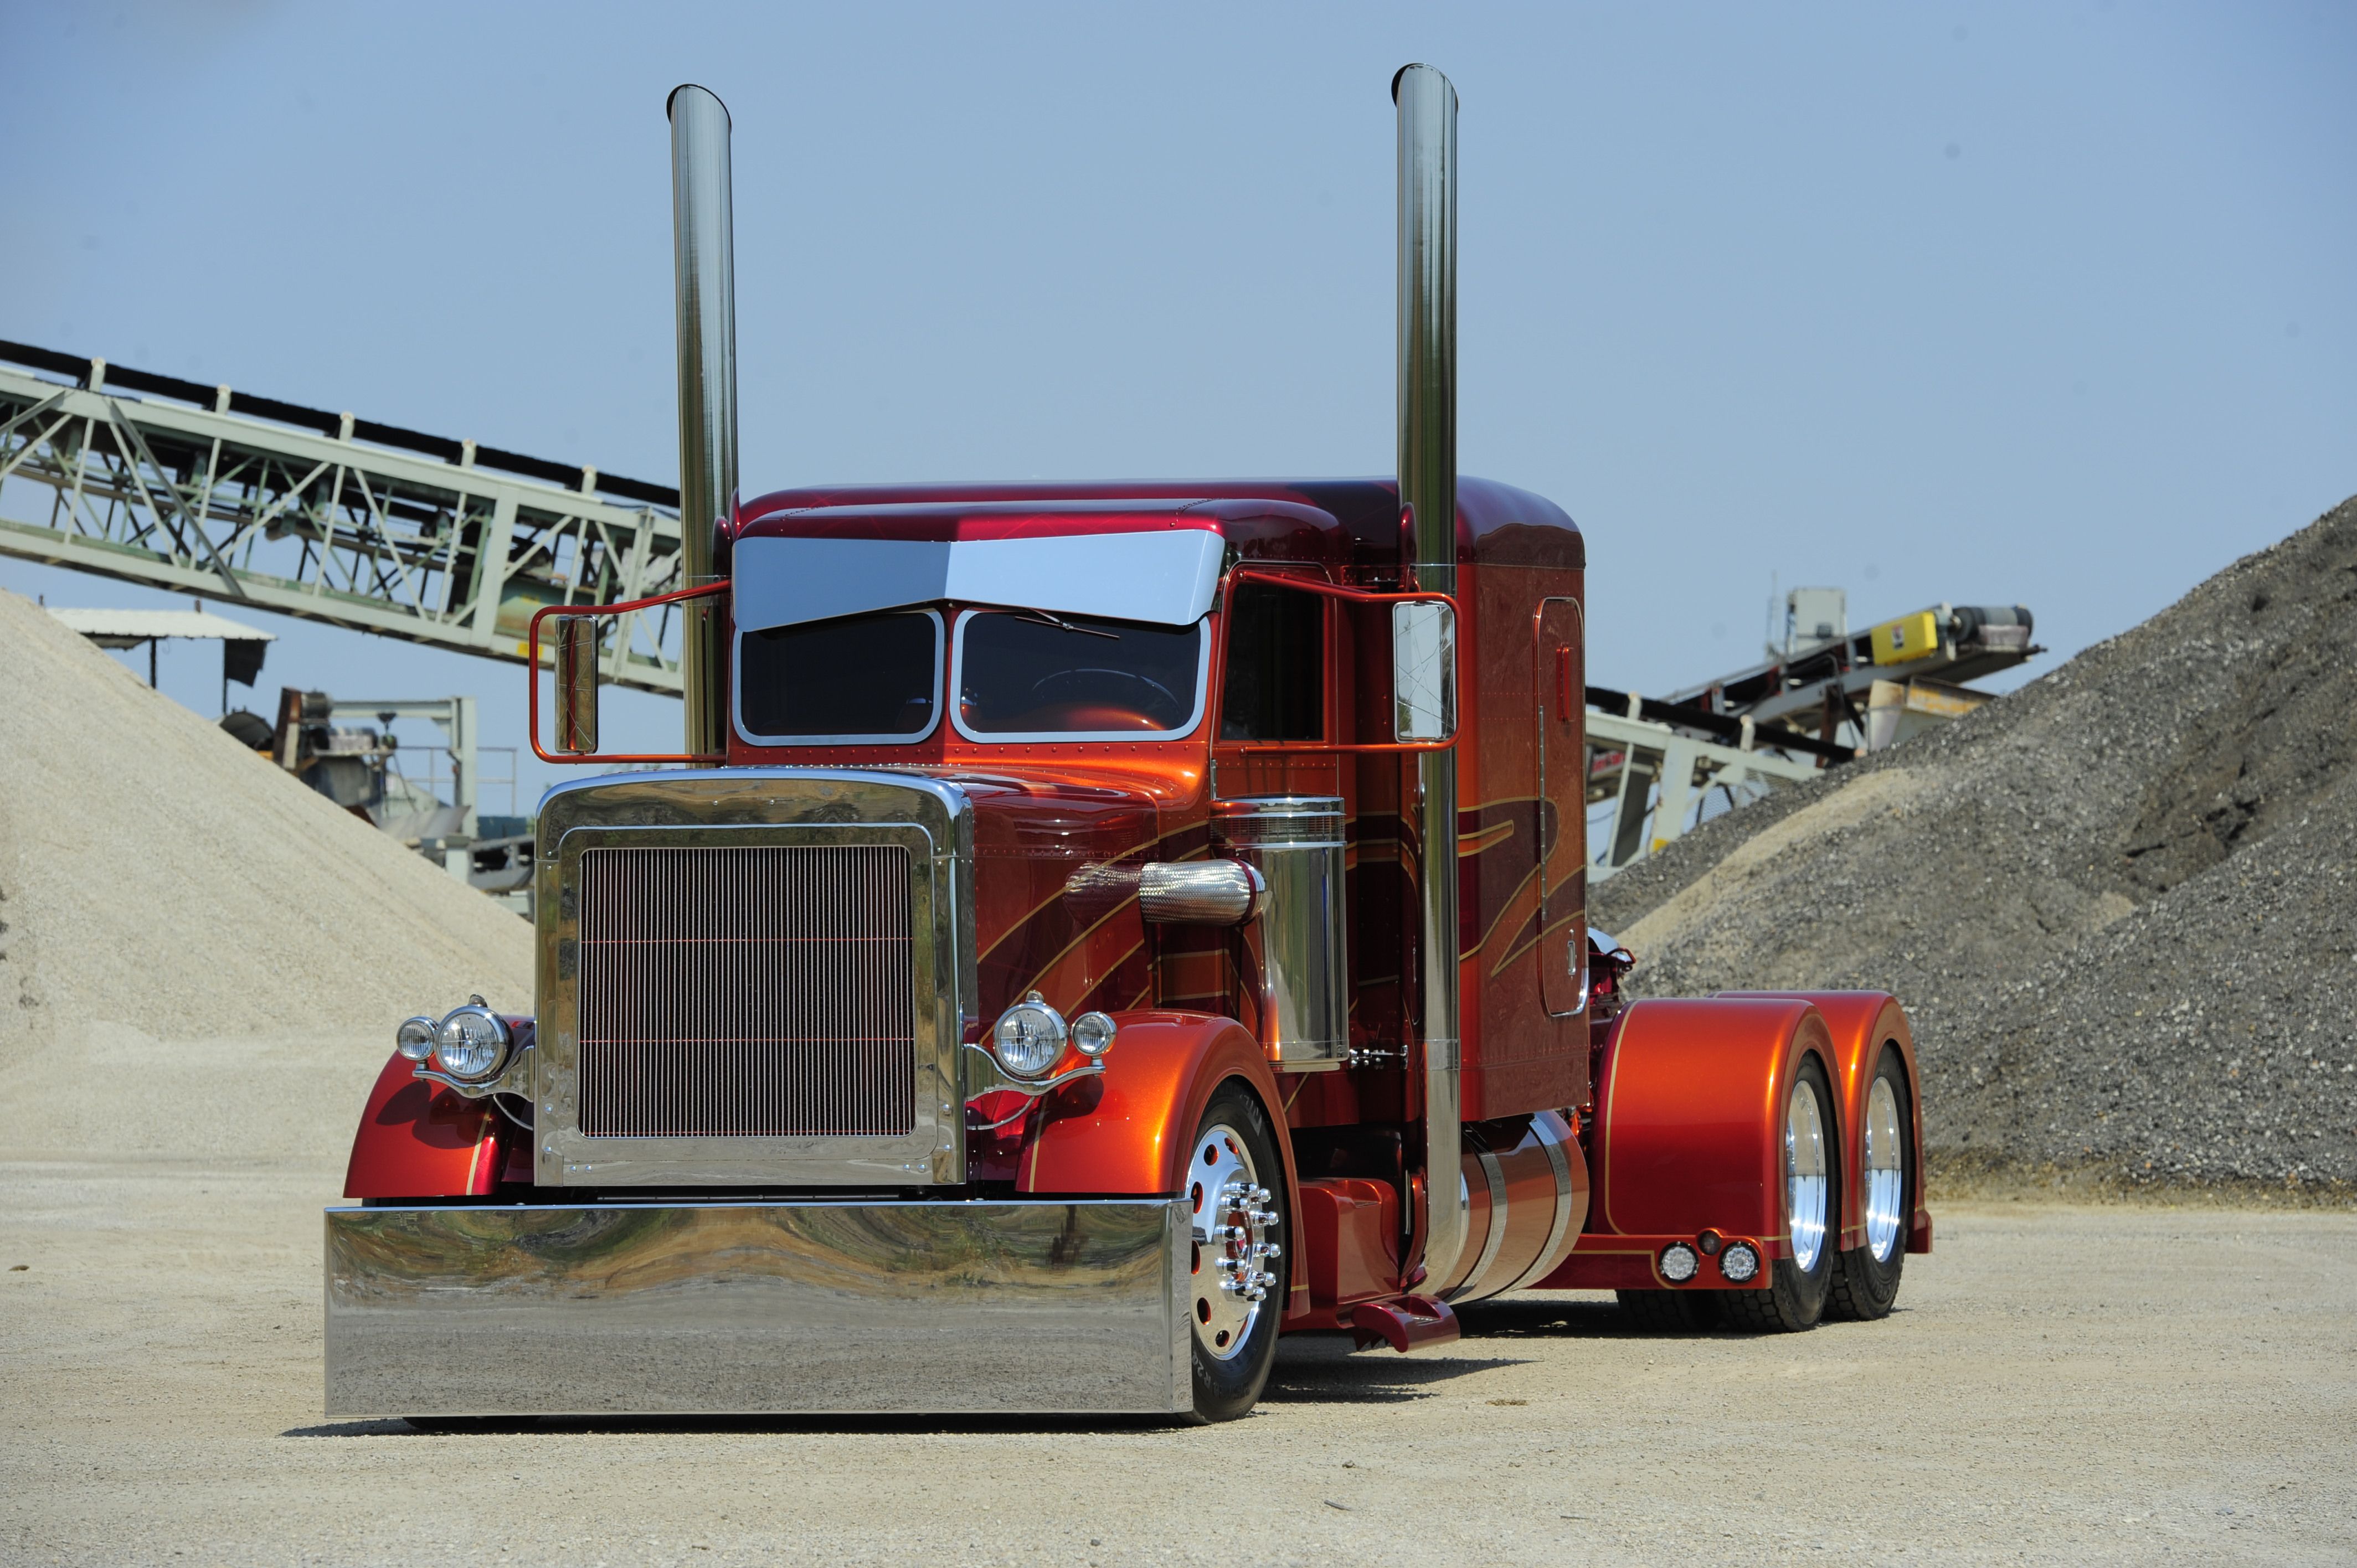 Peterbilt Wallpaper, Peterbilt Wallpaper. Peterbilt Awesome